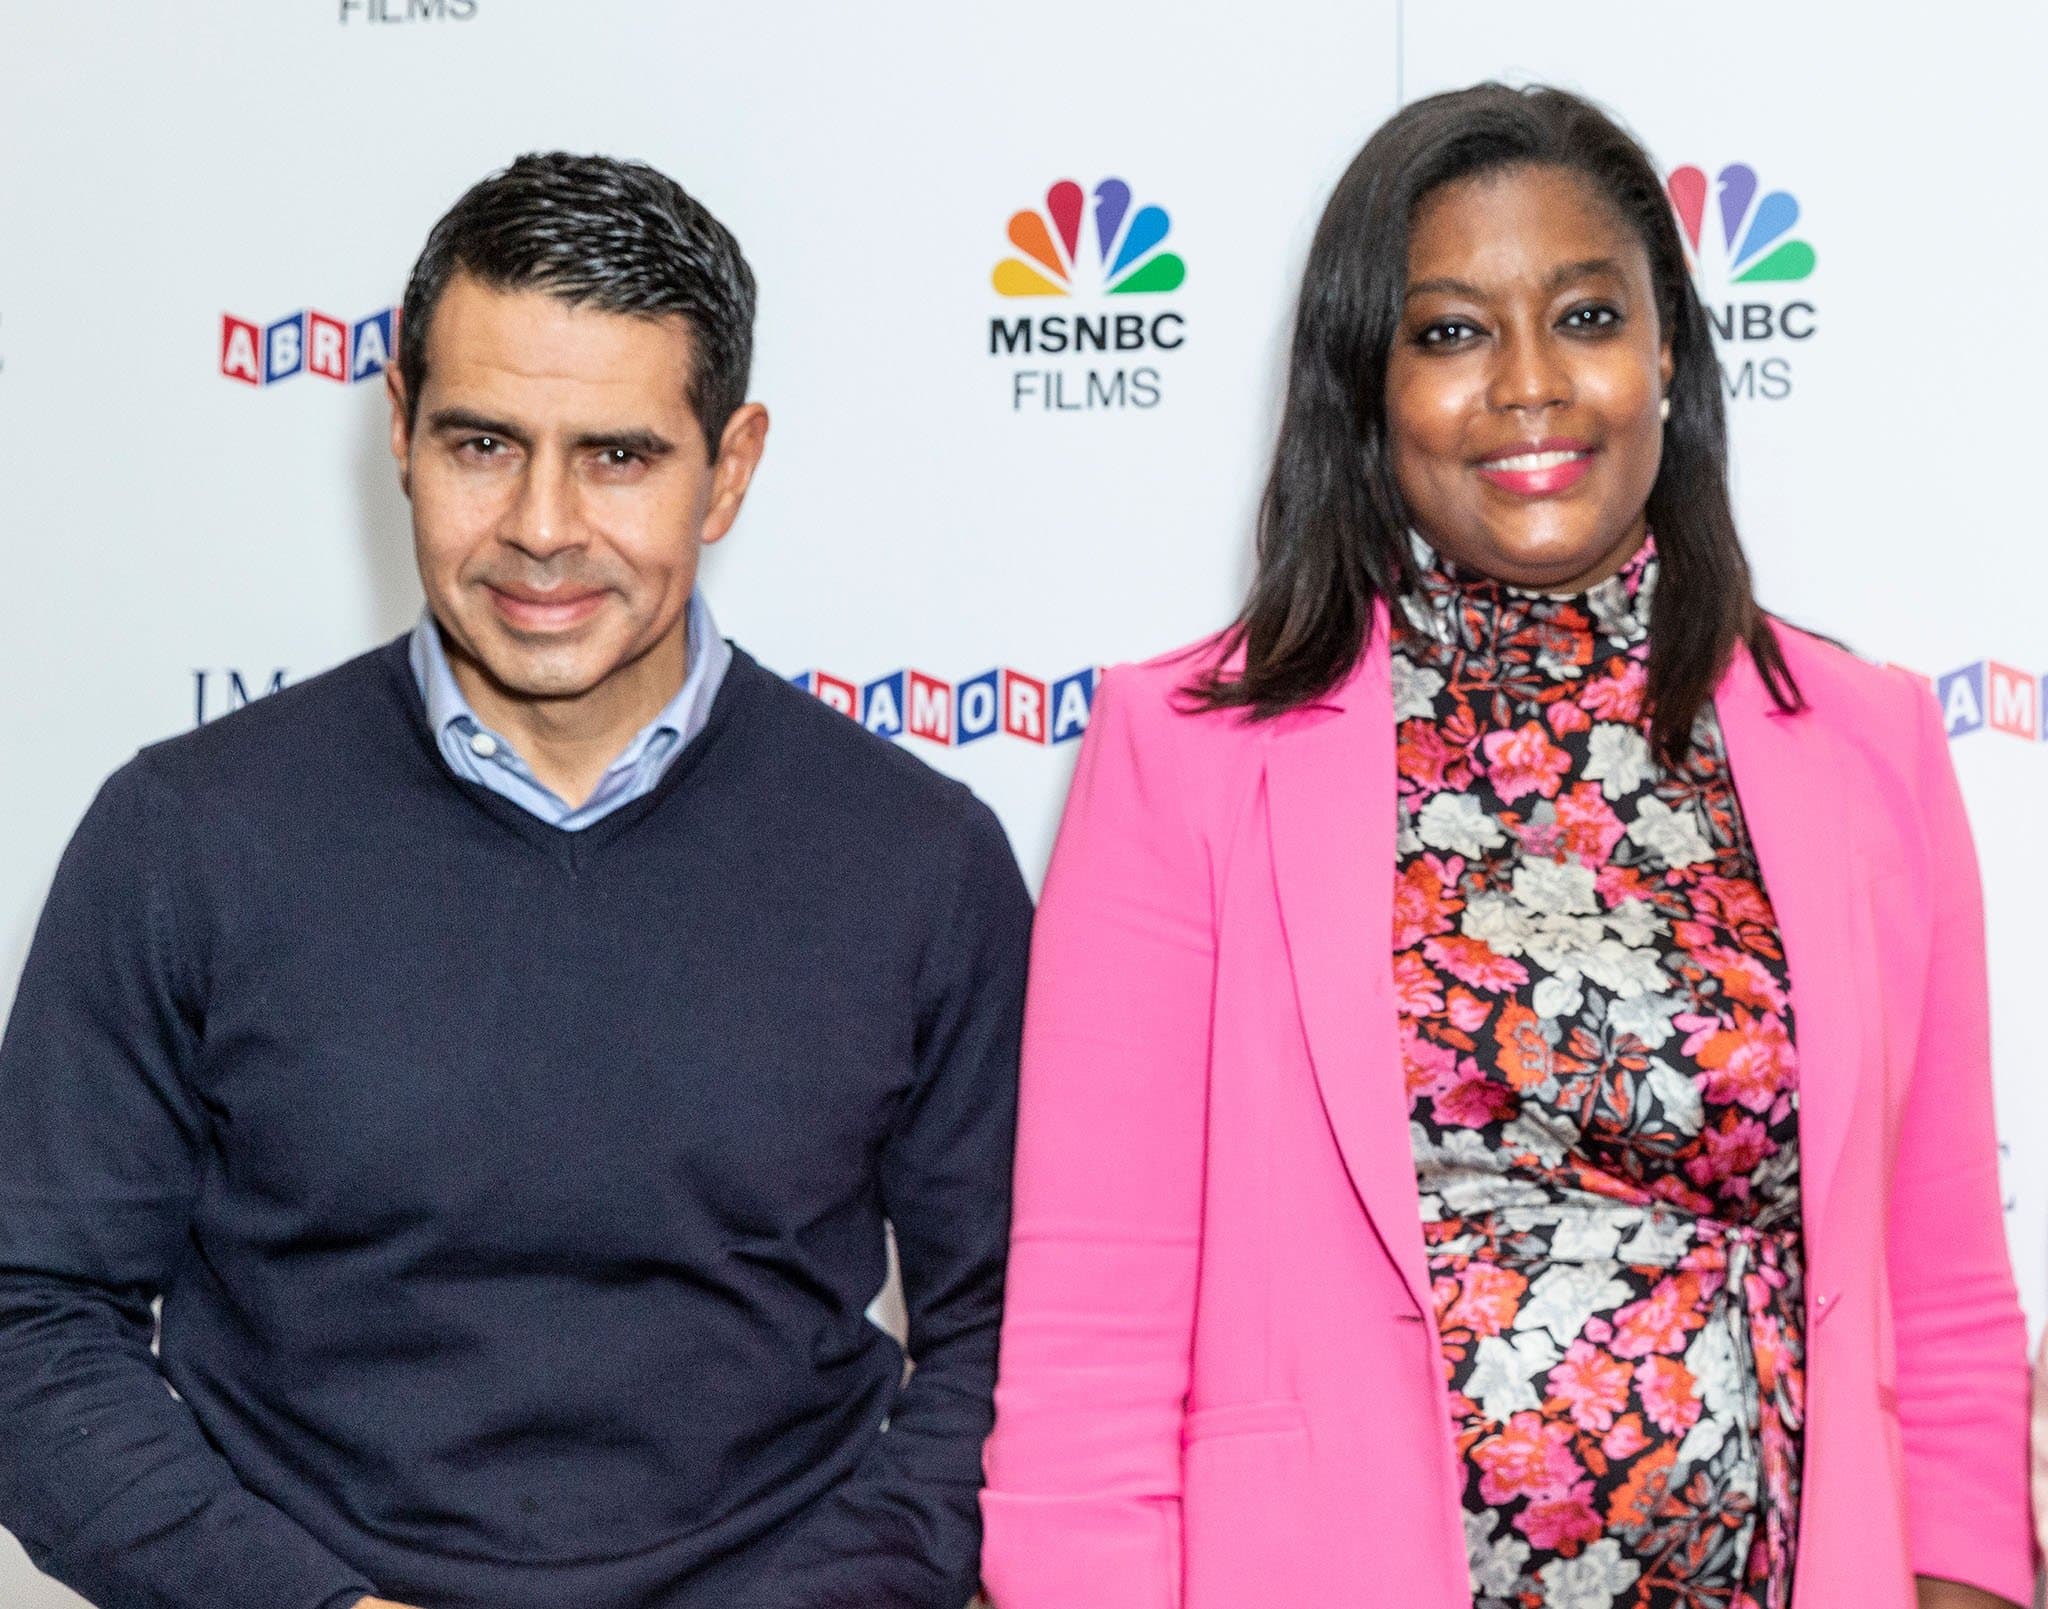 Chairman of NBCUniversal News Group, Caesar Conde, and MSNBC president Rashida Jones attend the special screening of Paper Glue at MoMA on November 8, 2021